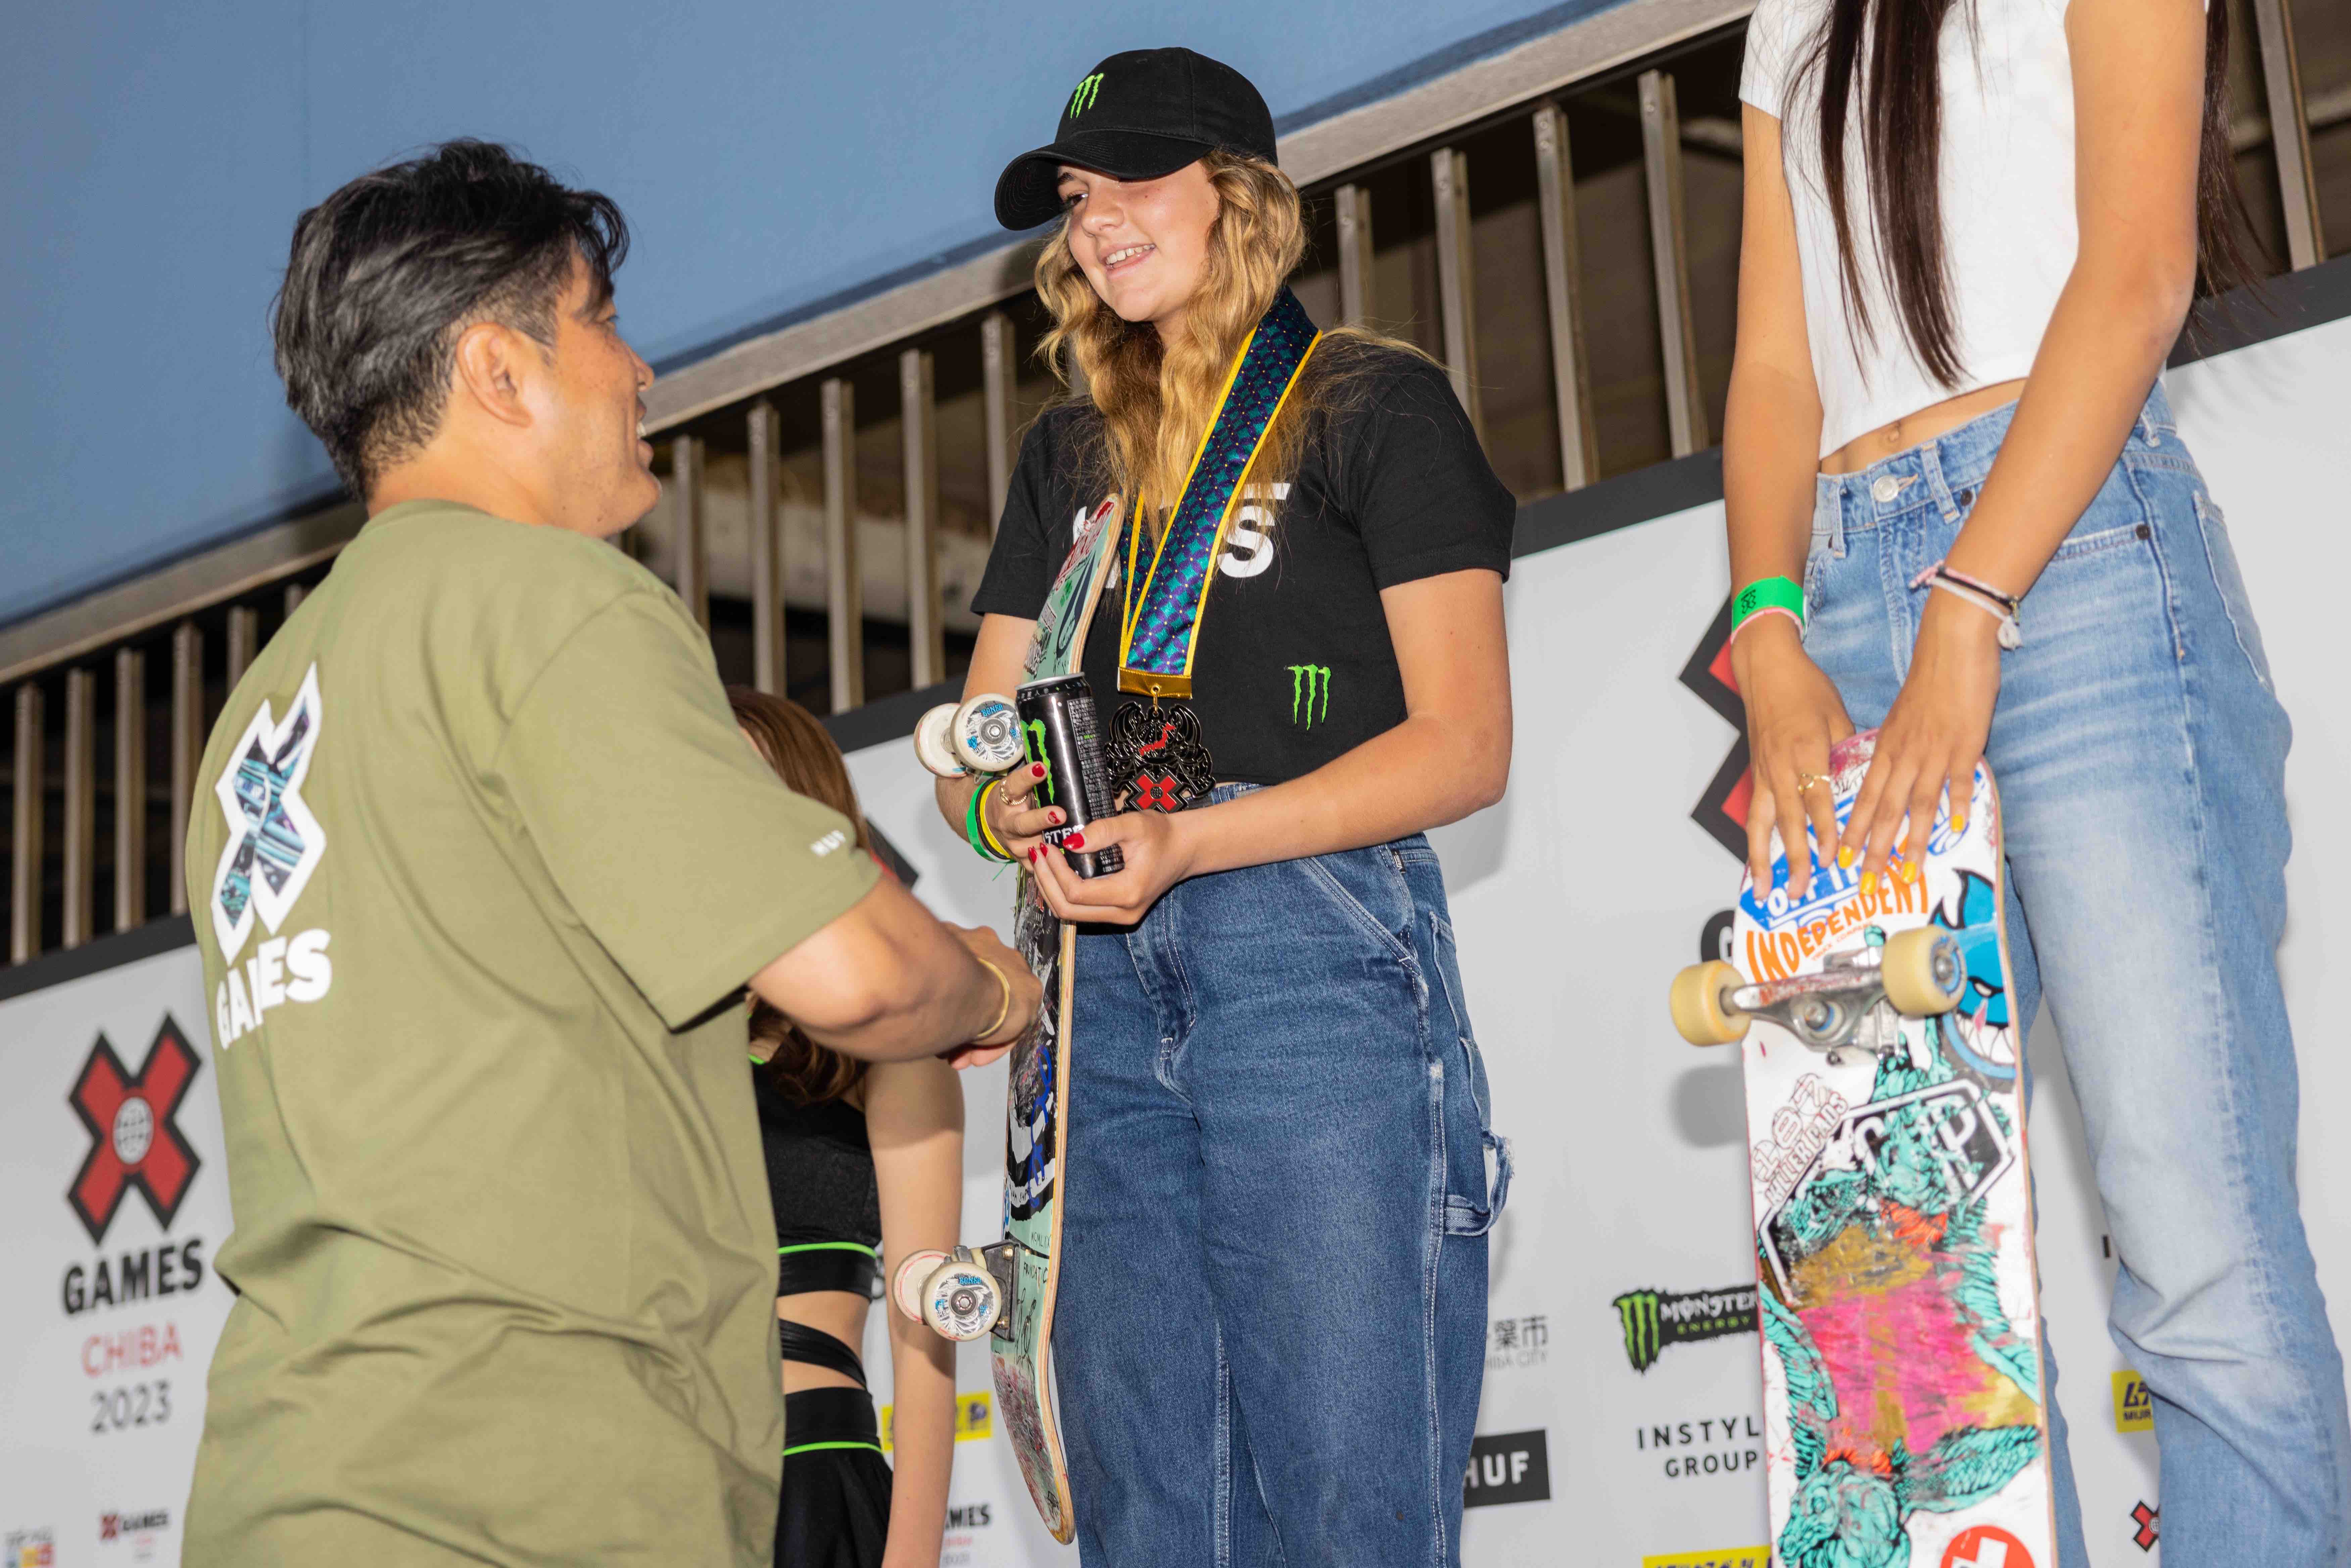 Monster Army's Ruby Lilley Wins Silver in Women's Skateboard Park at X Games Chiba 2023